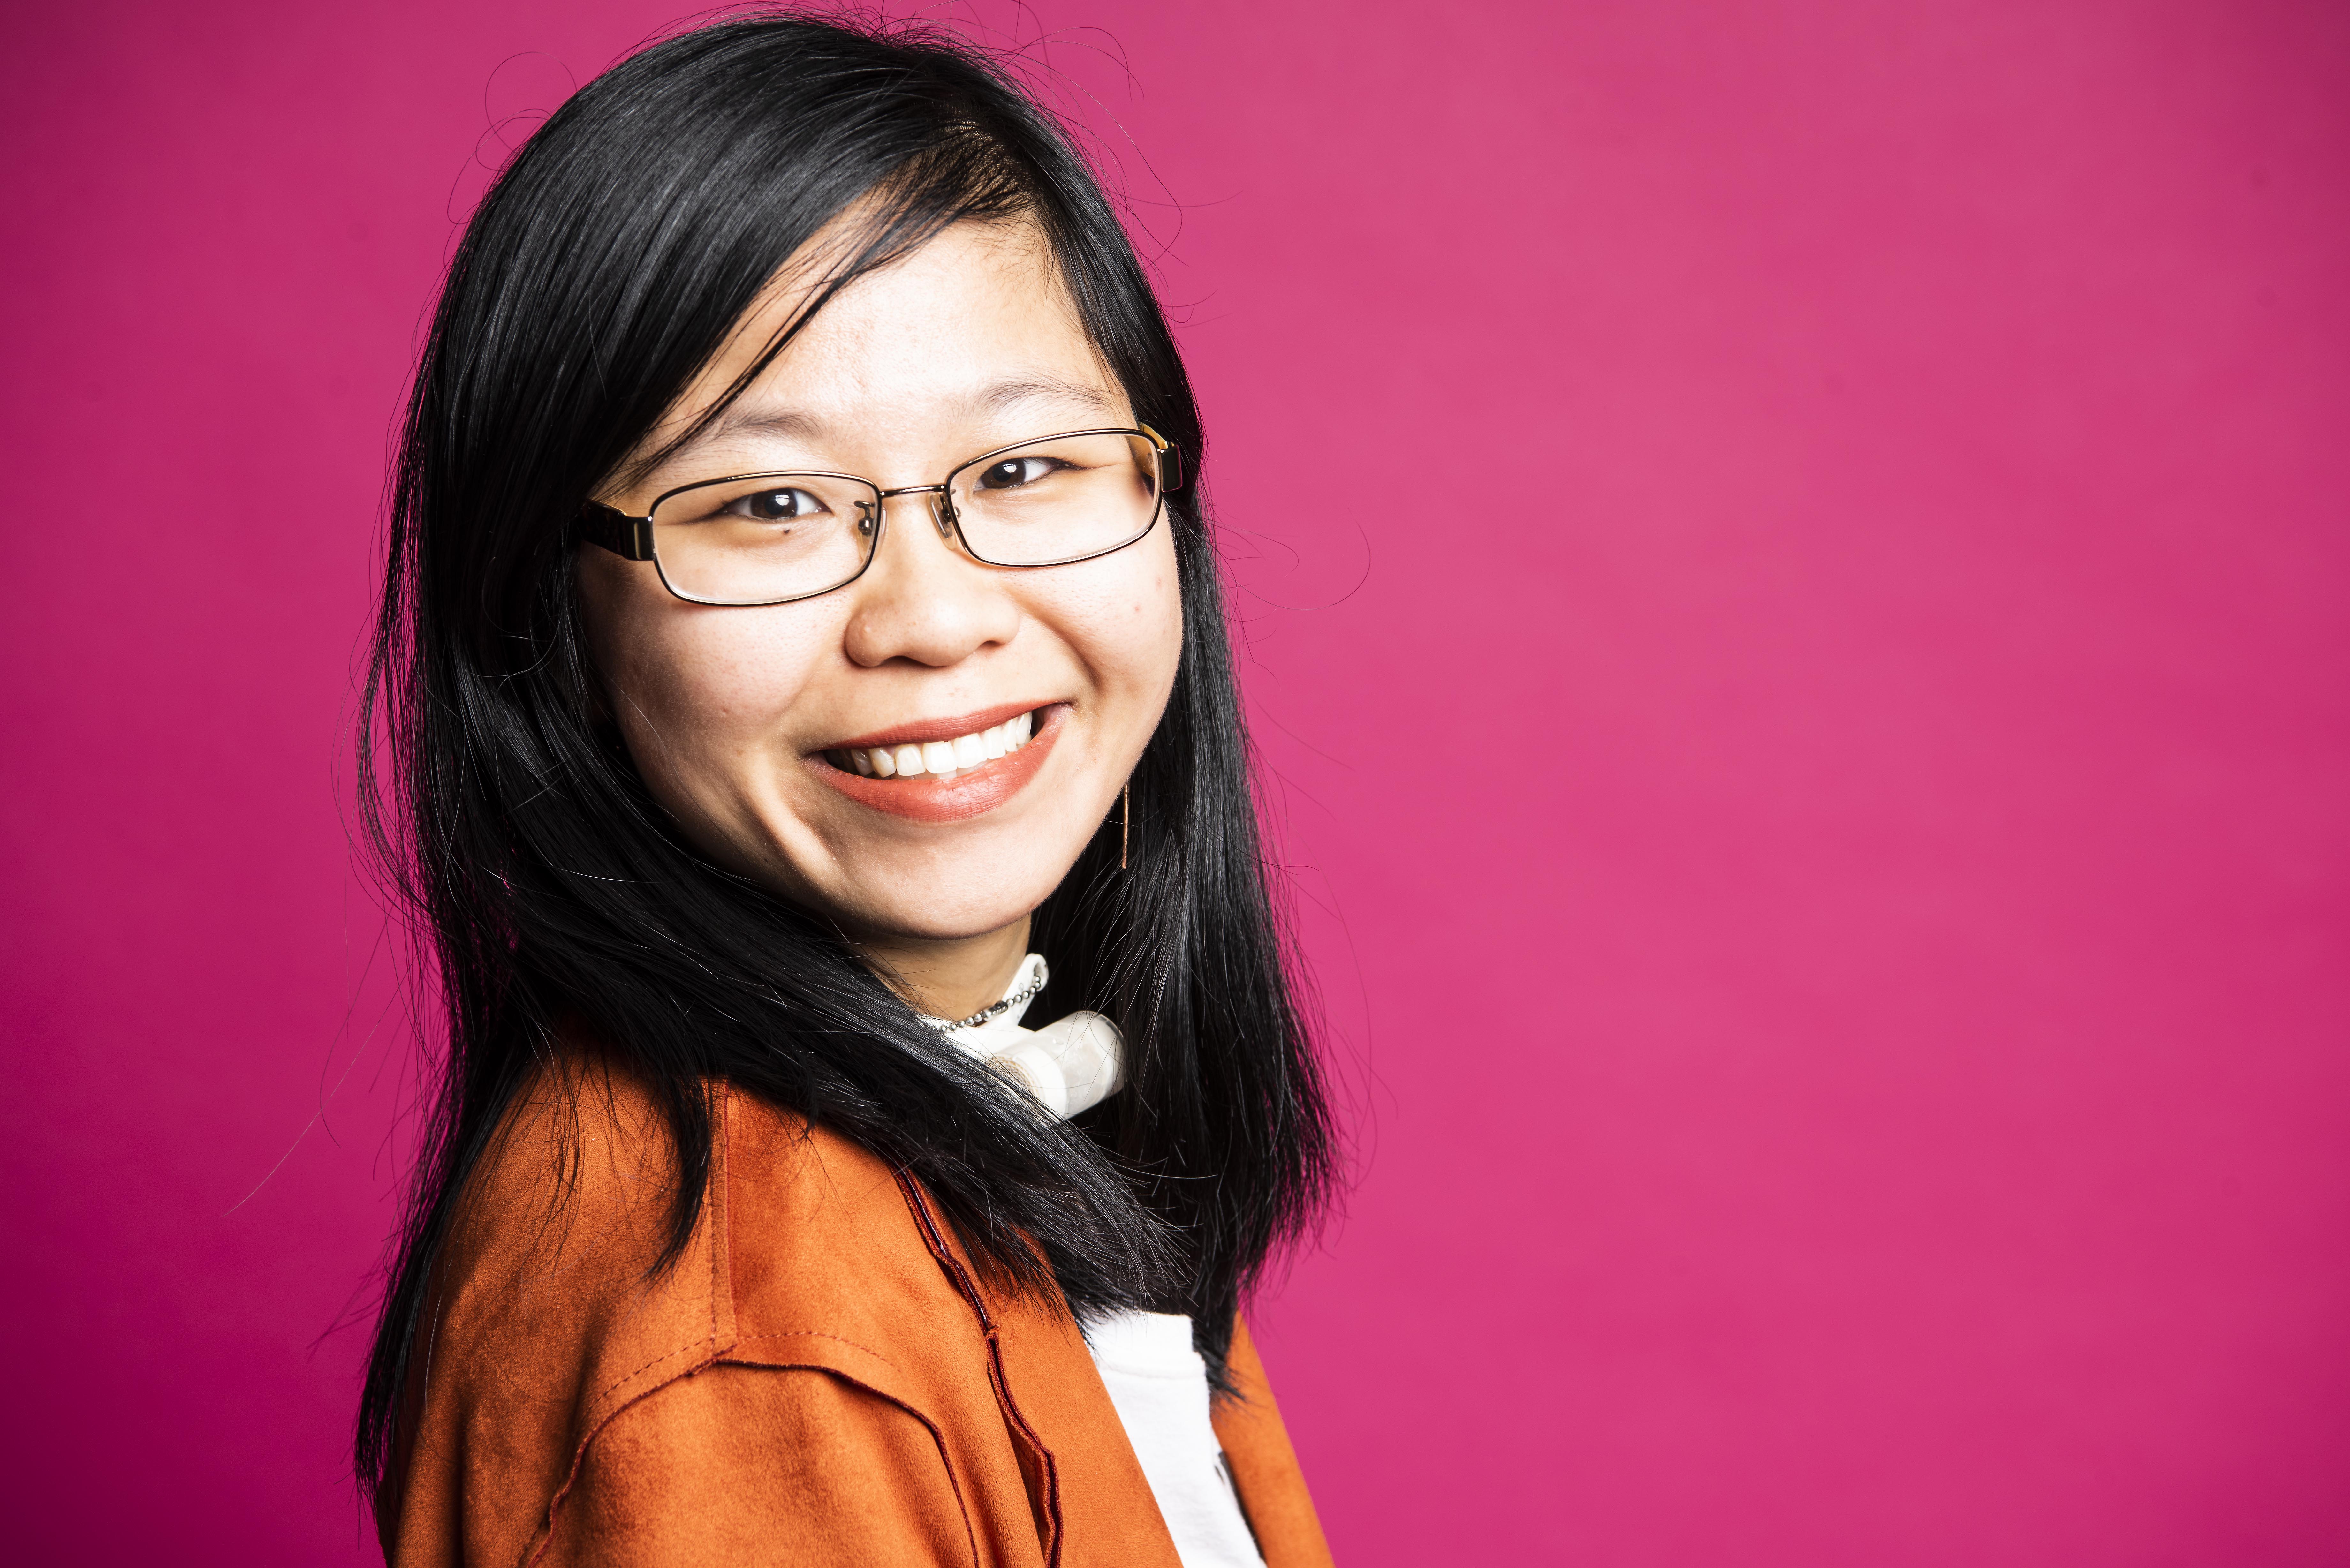 A young Chinese American woman smiles at the camera against a pink background. She's wearing glasses, a tracheostomy tube and an orange jacket.